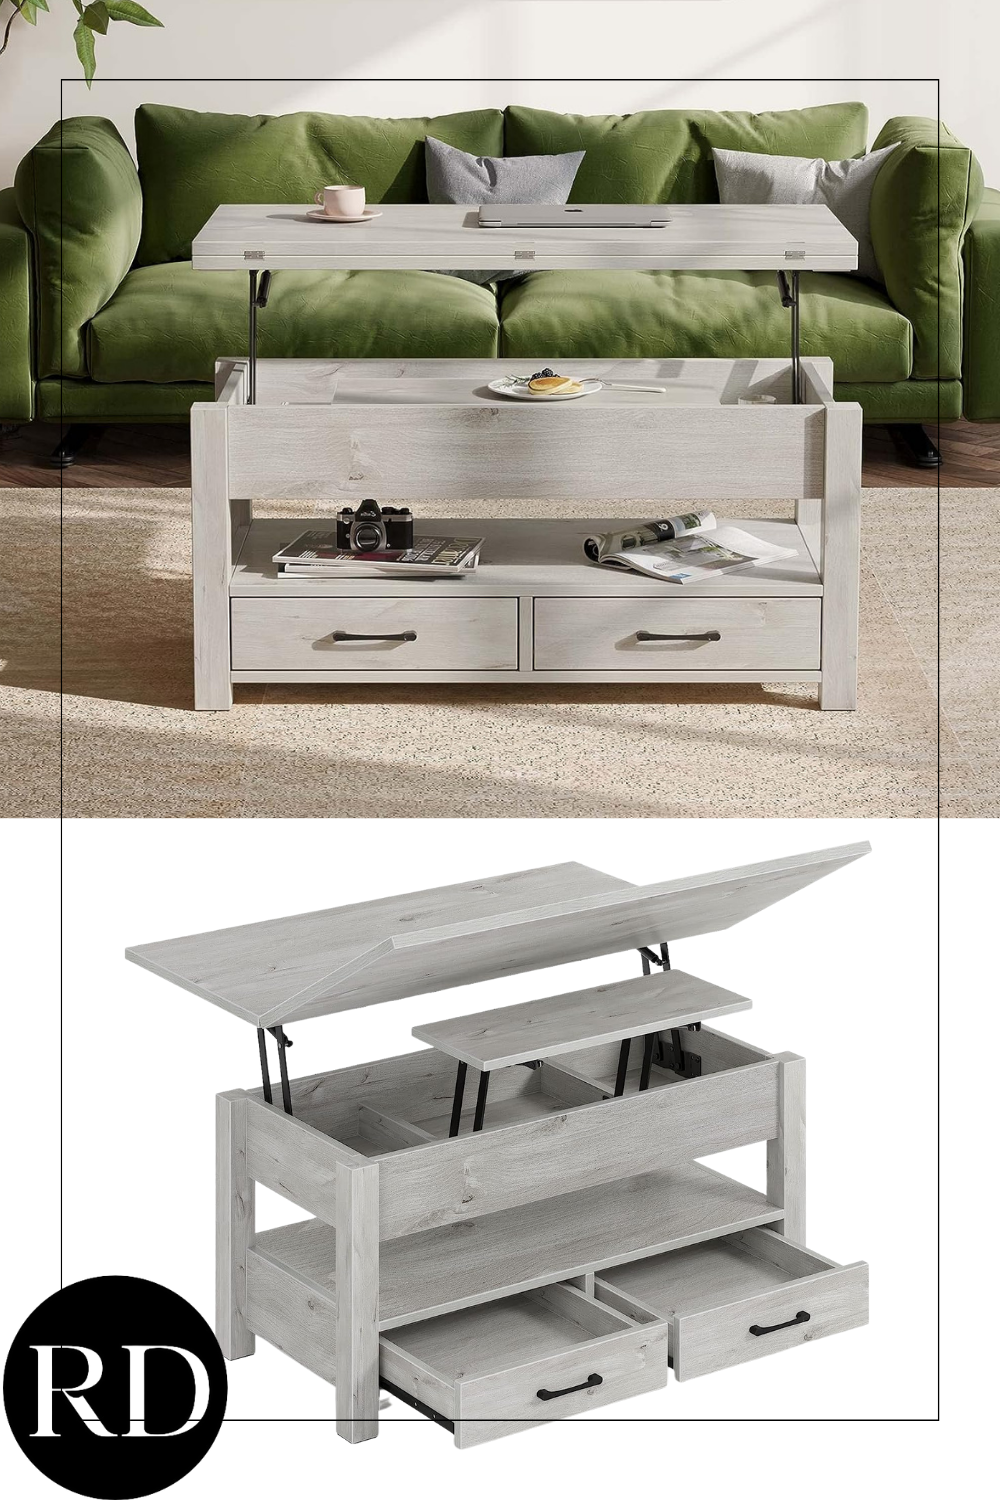 Multi-Function Convertible Coffee Table with Drawers and Hidden Compartment, Coffee Table Converts to Dining Table for Living Room, Home Office,Grey